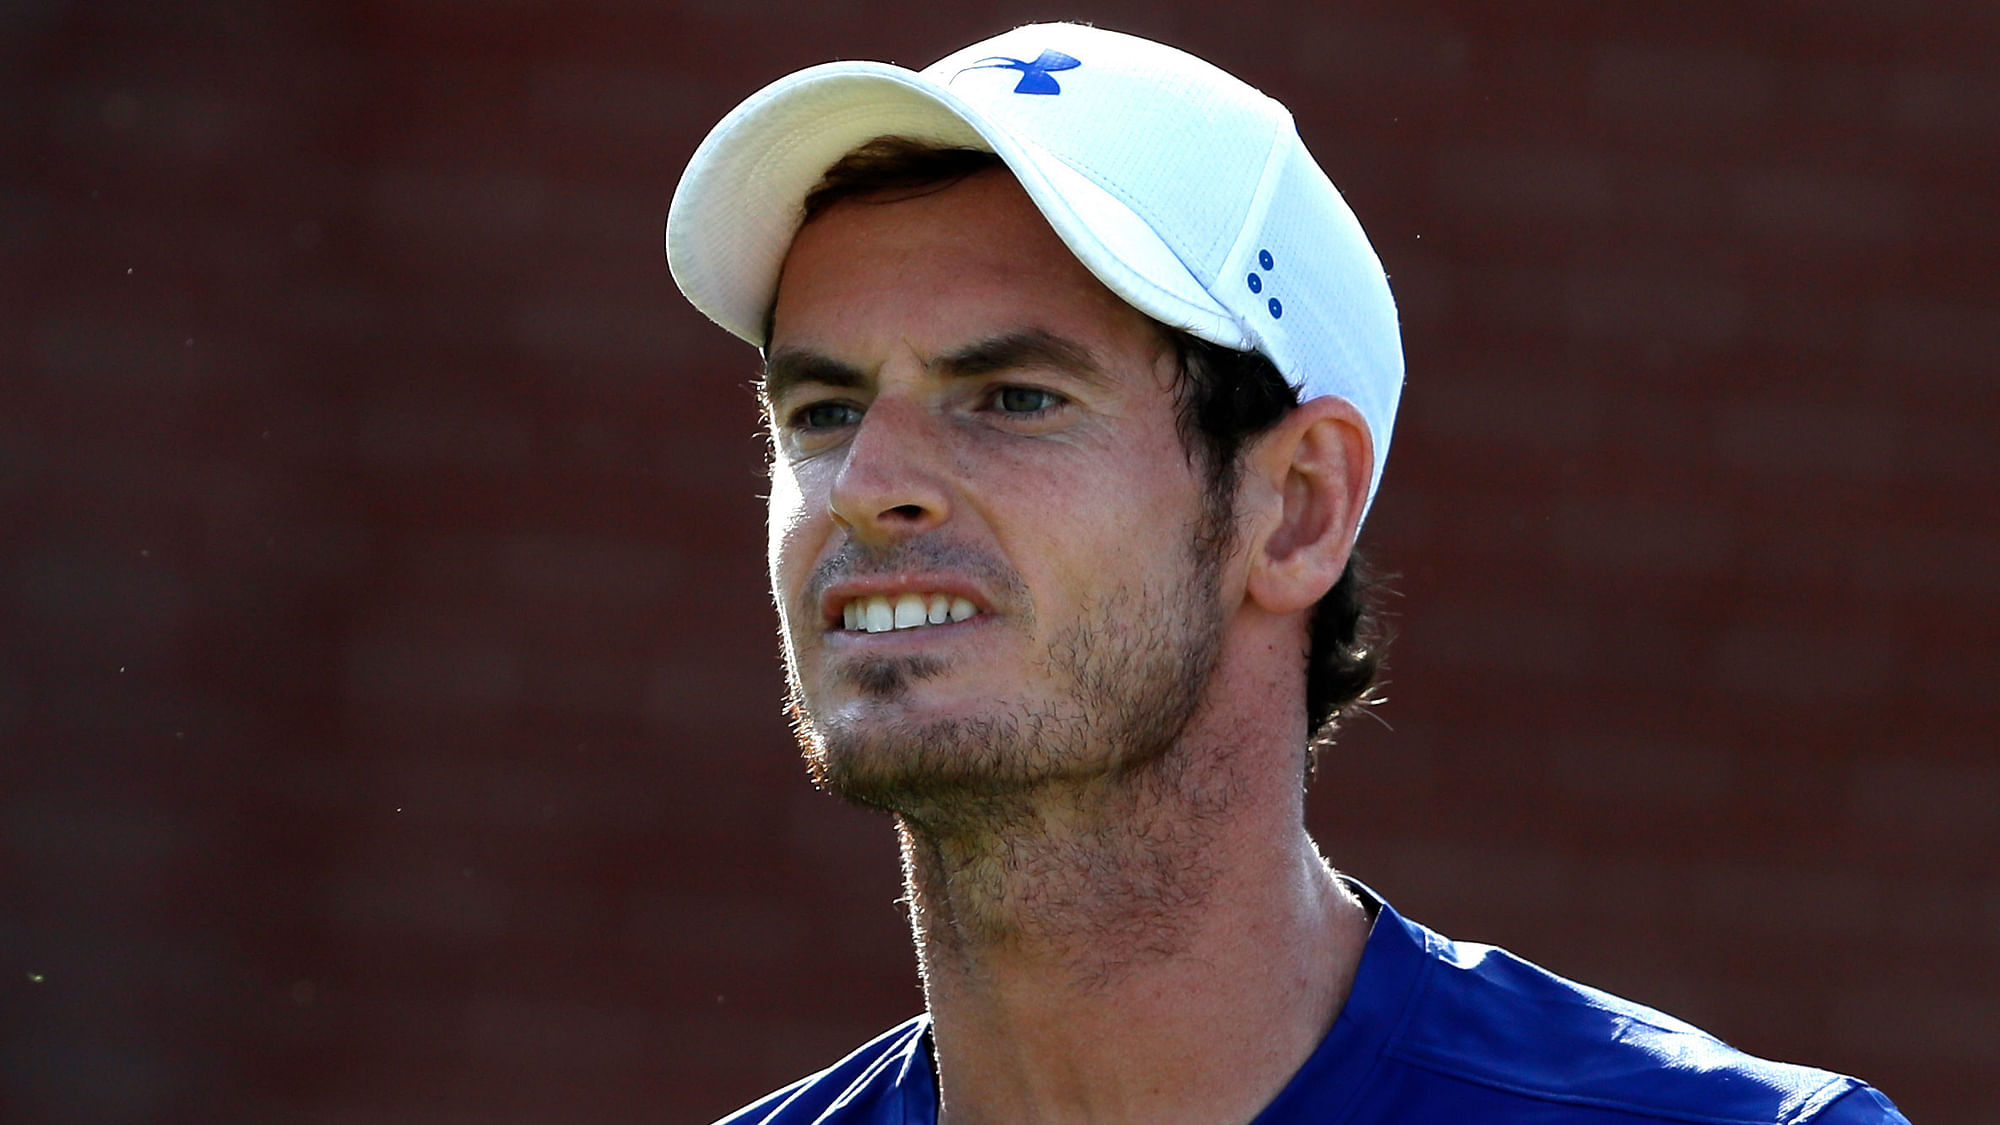 Andy Murray reacts during his Queen’s Club match against Jordan Thompson. (Photo: AP)